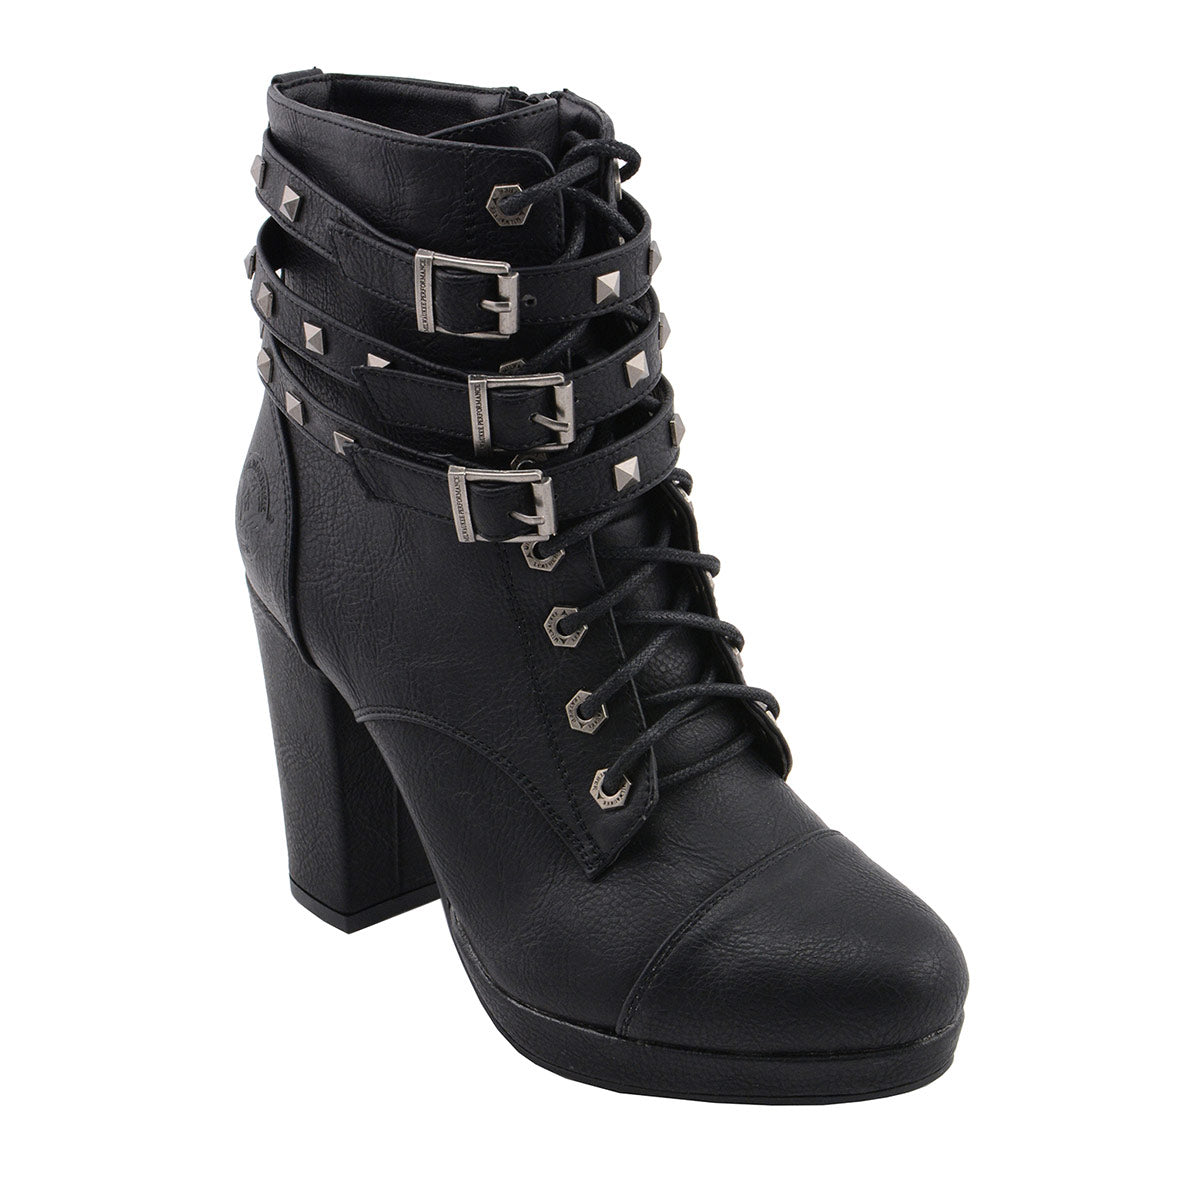 Milwaukee Leather MBL9417 Women's Black Lace-Up Fashion Boots with ...